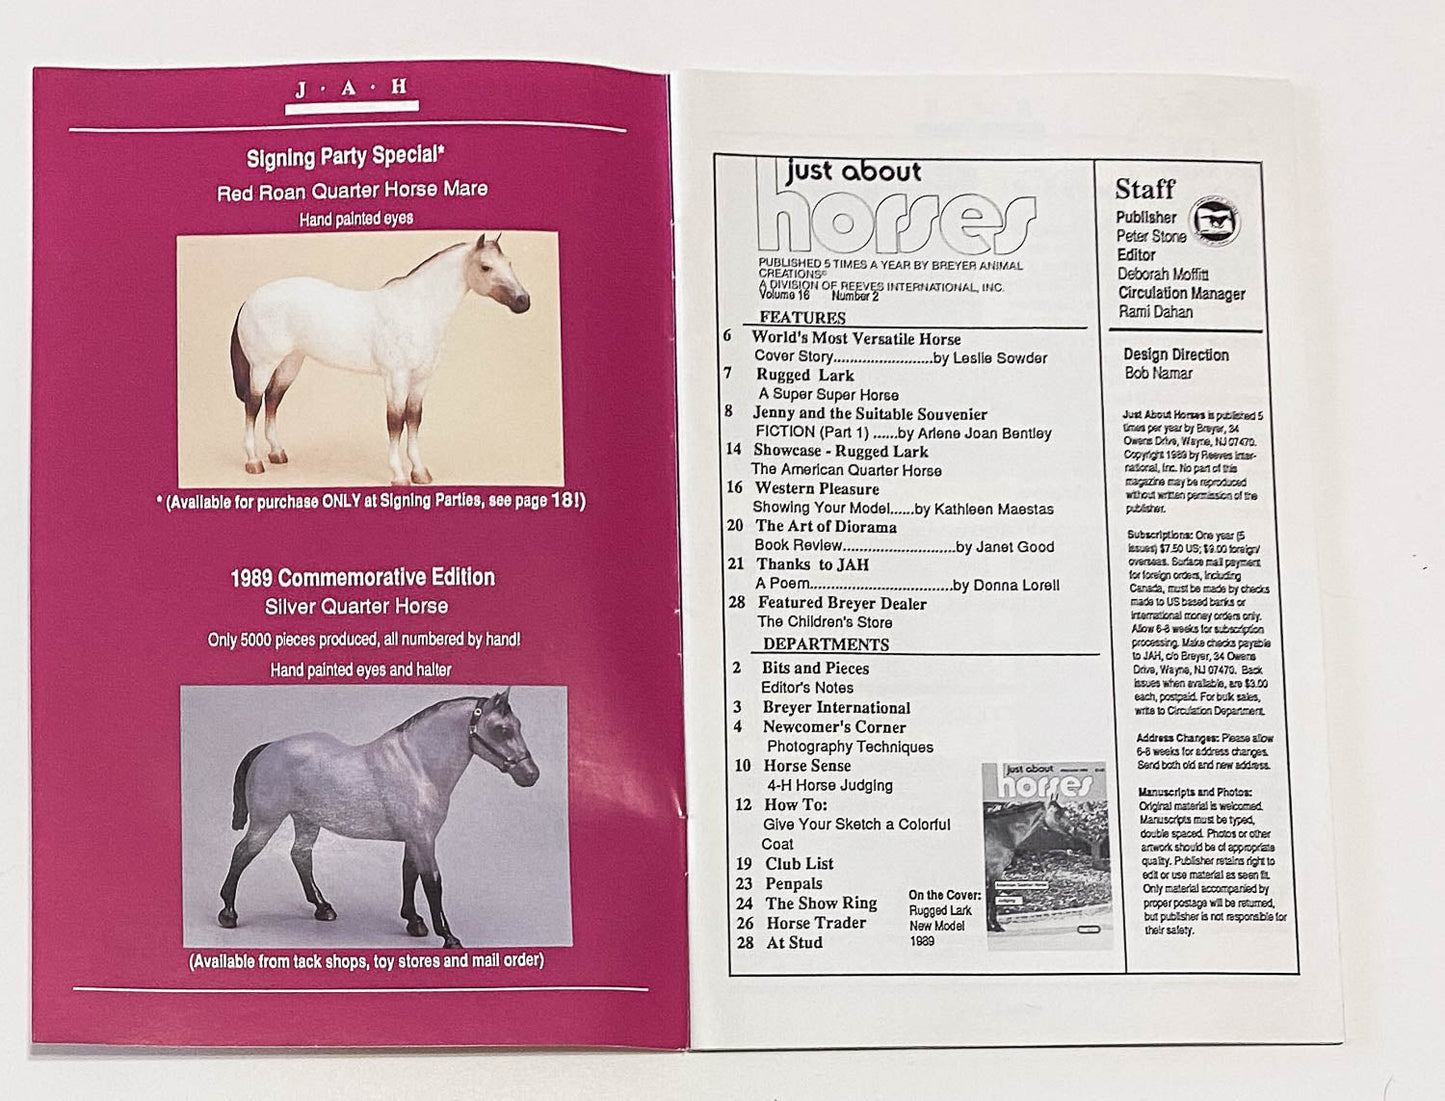 Just About Horses Magazine Vol. 16 No. 2, 1989, May/June